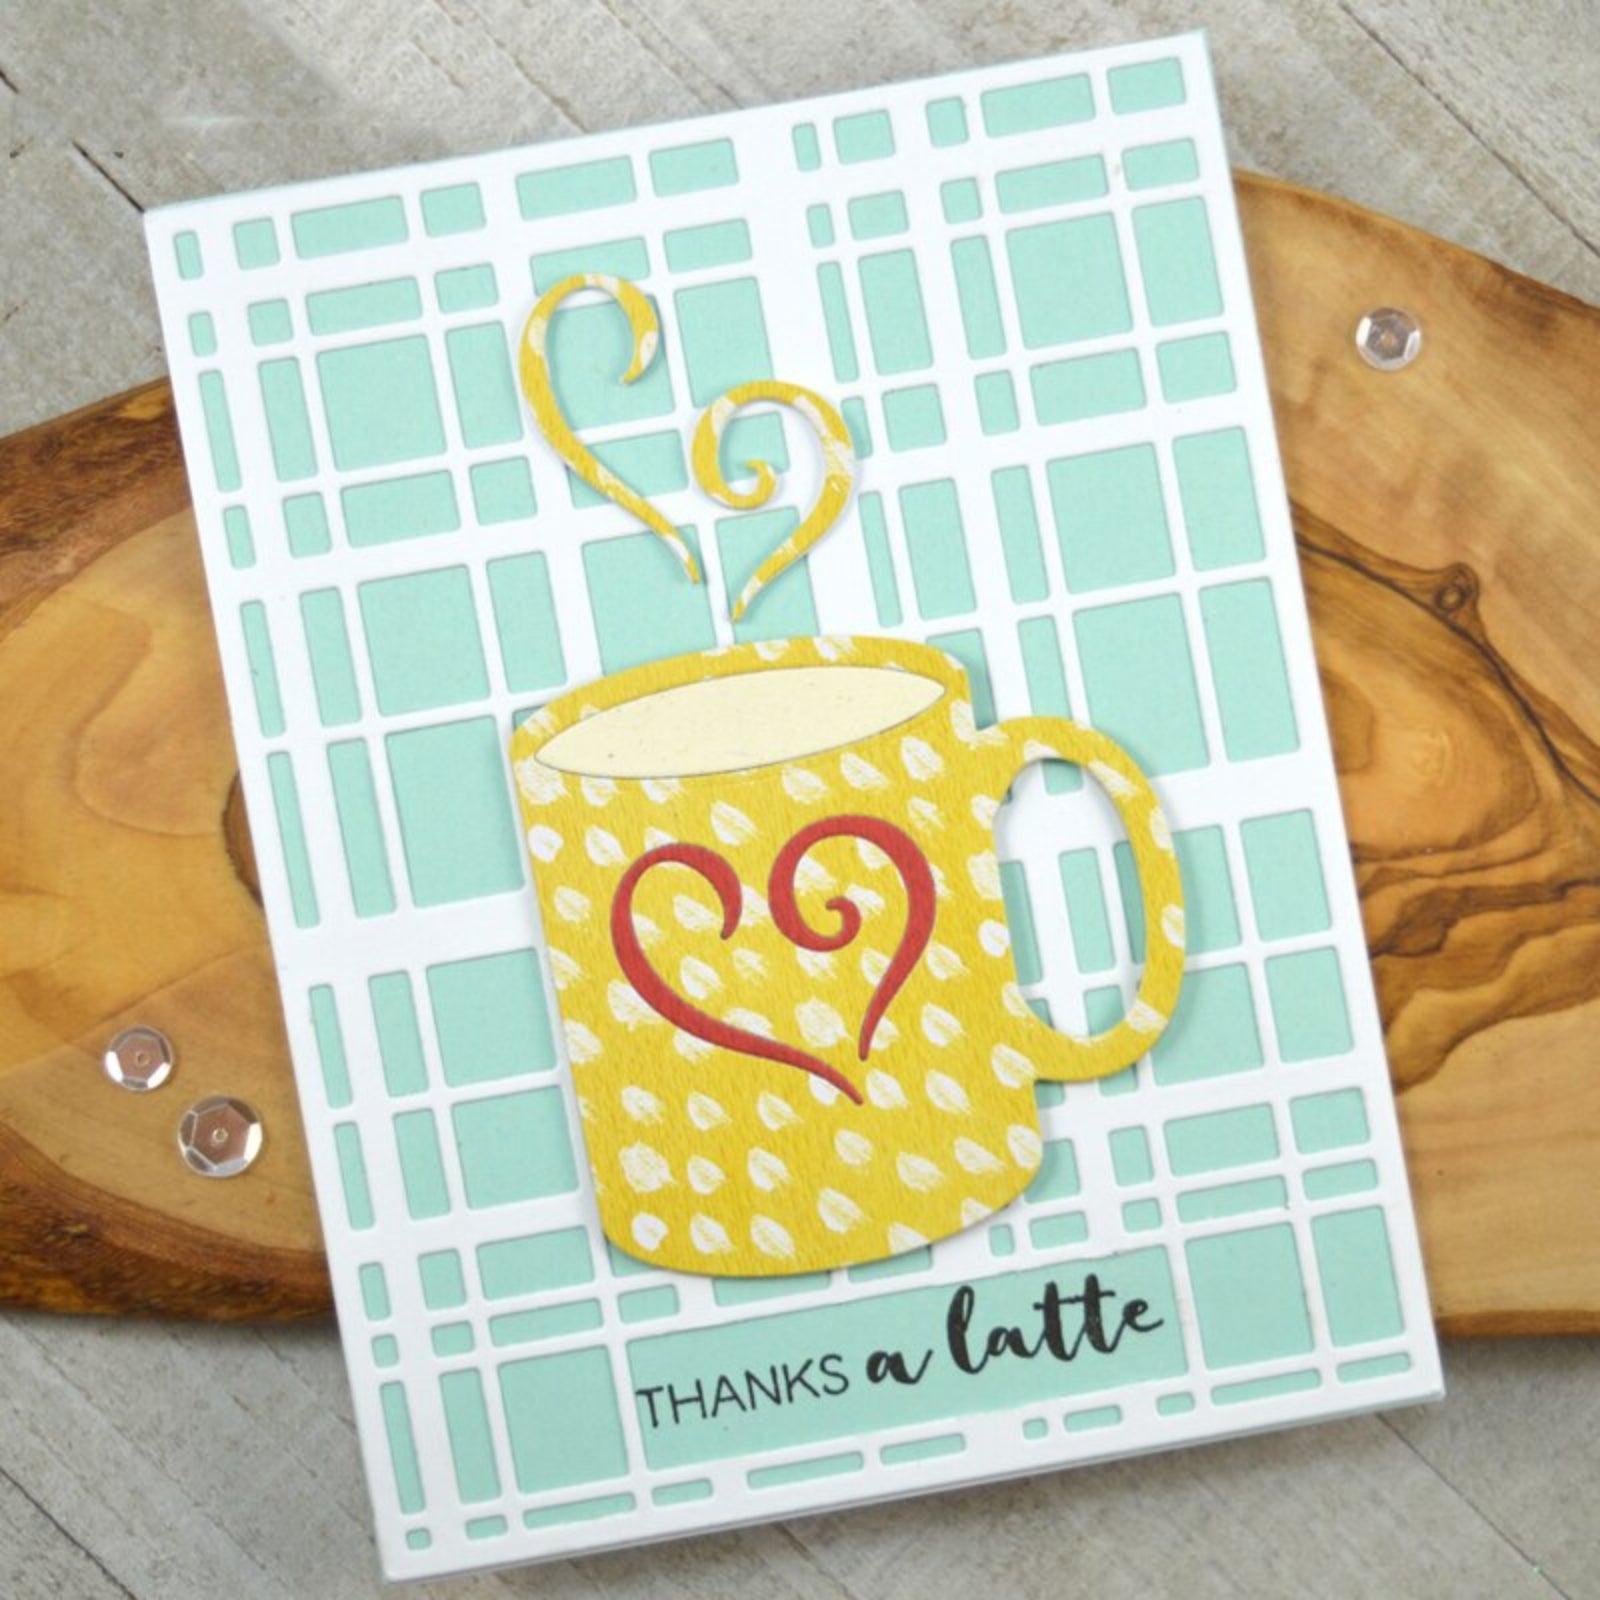 Make Your Own Hot Chocolate Cutting & Embossing Dies